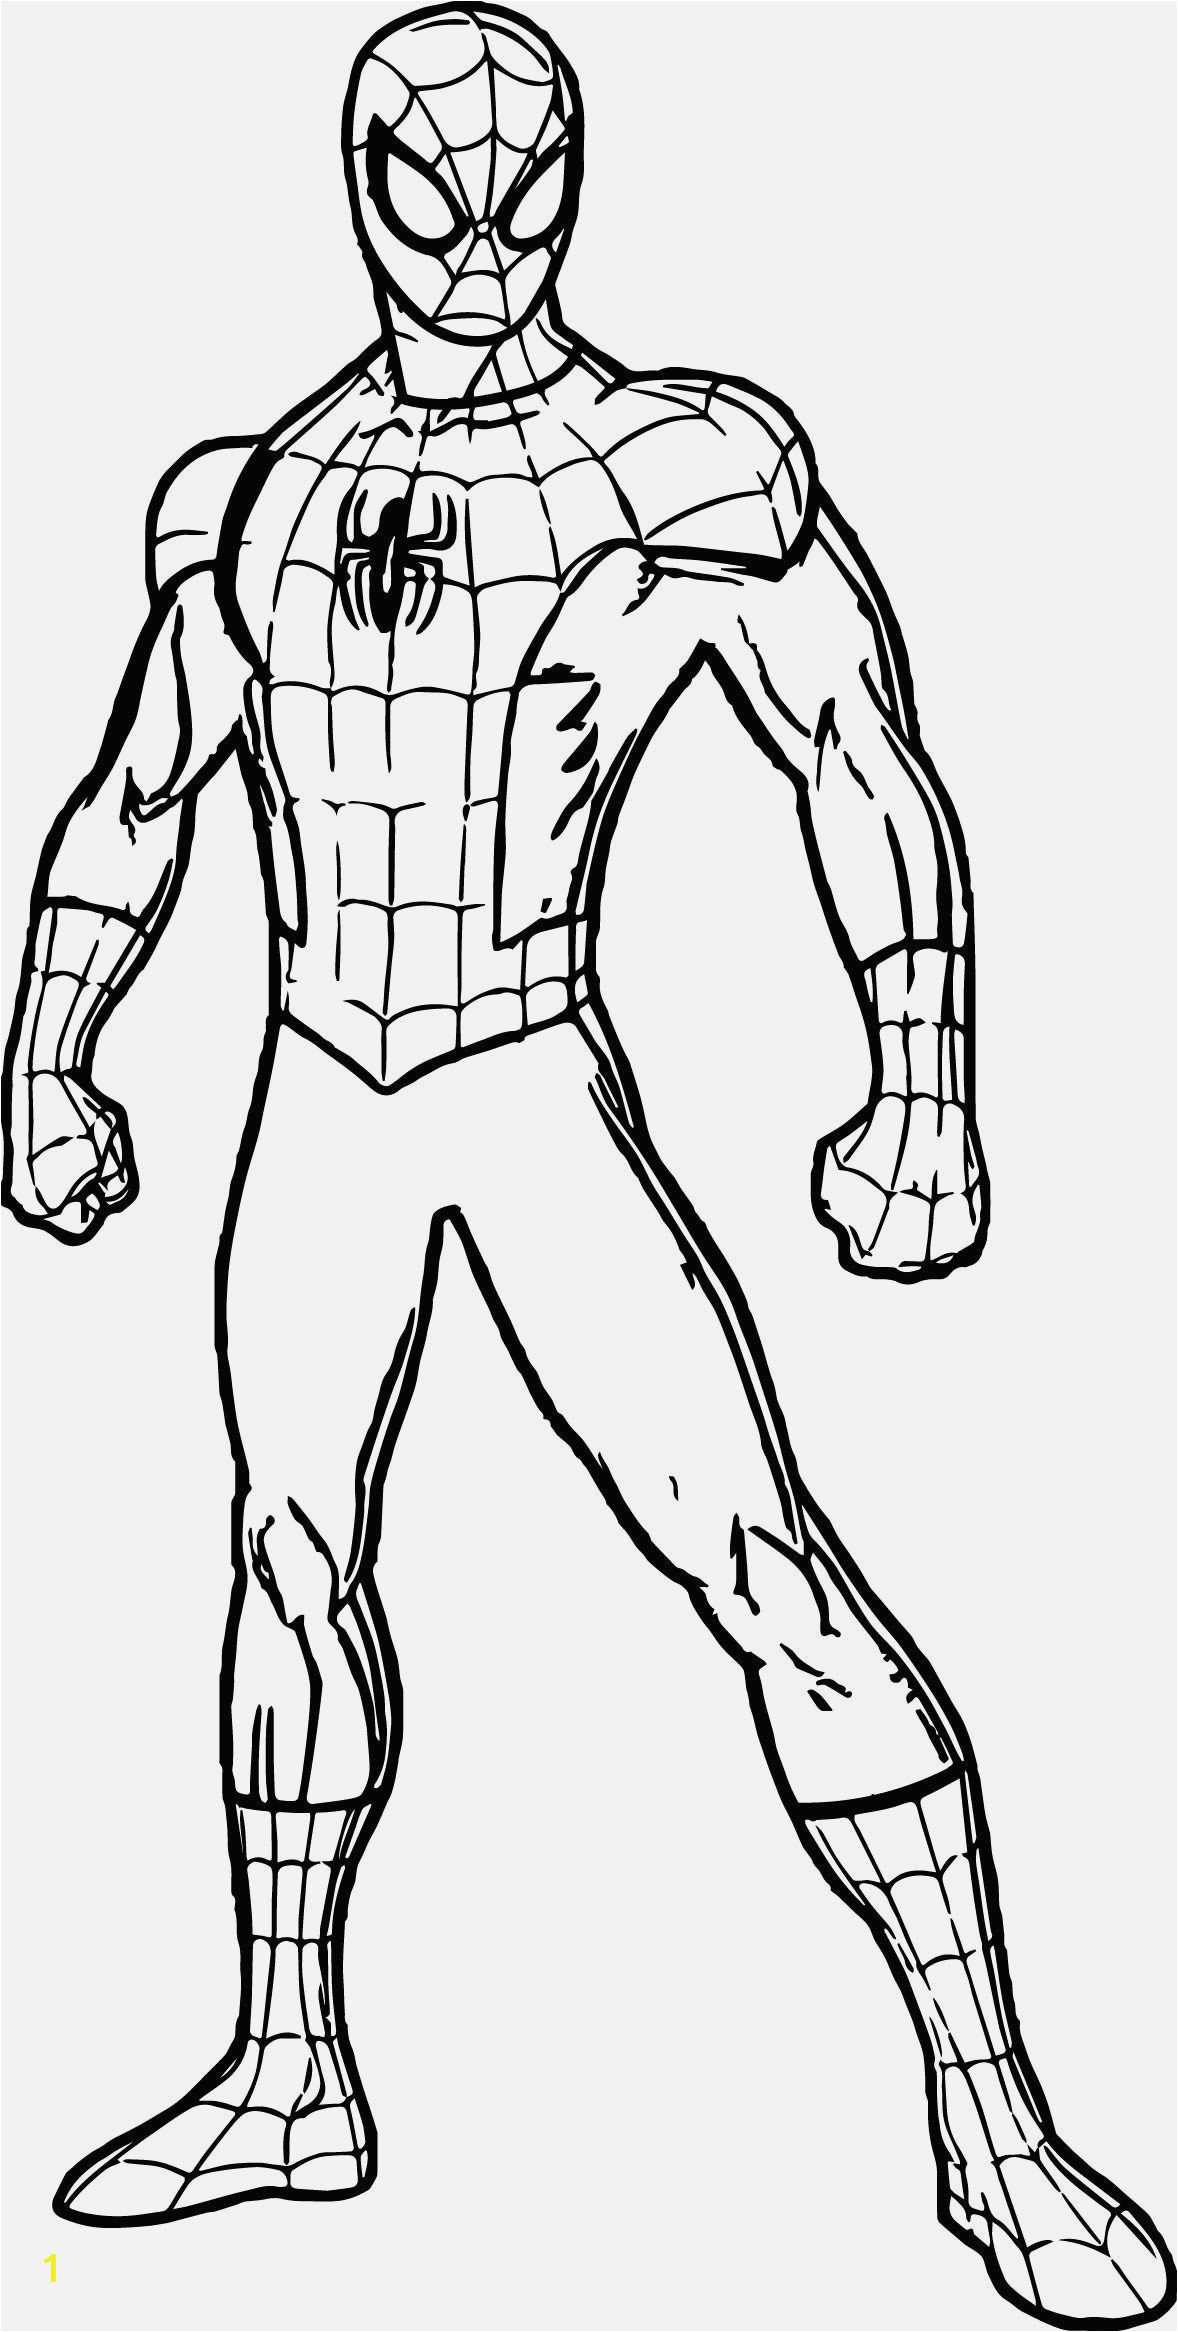 Spiderman Coloring Pages to Print Pdf Marvelous Image Of Free Spiderman Coloring Pages